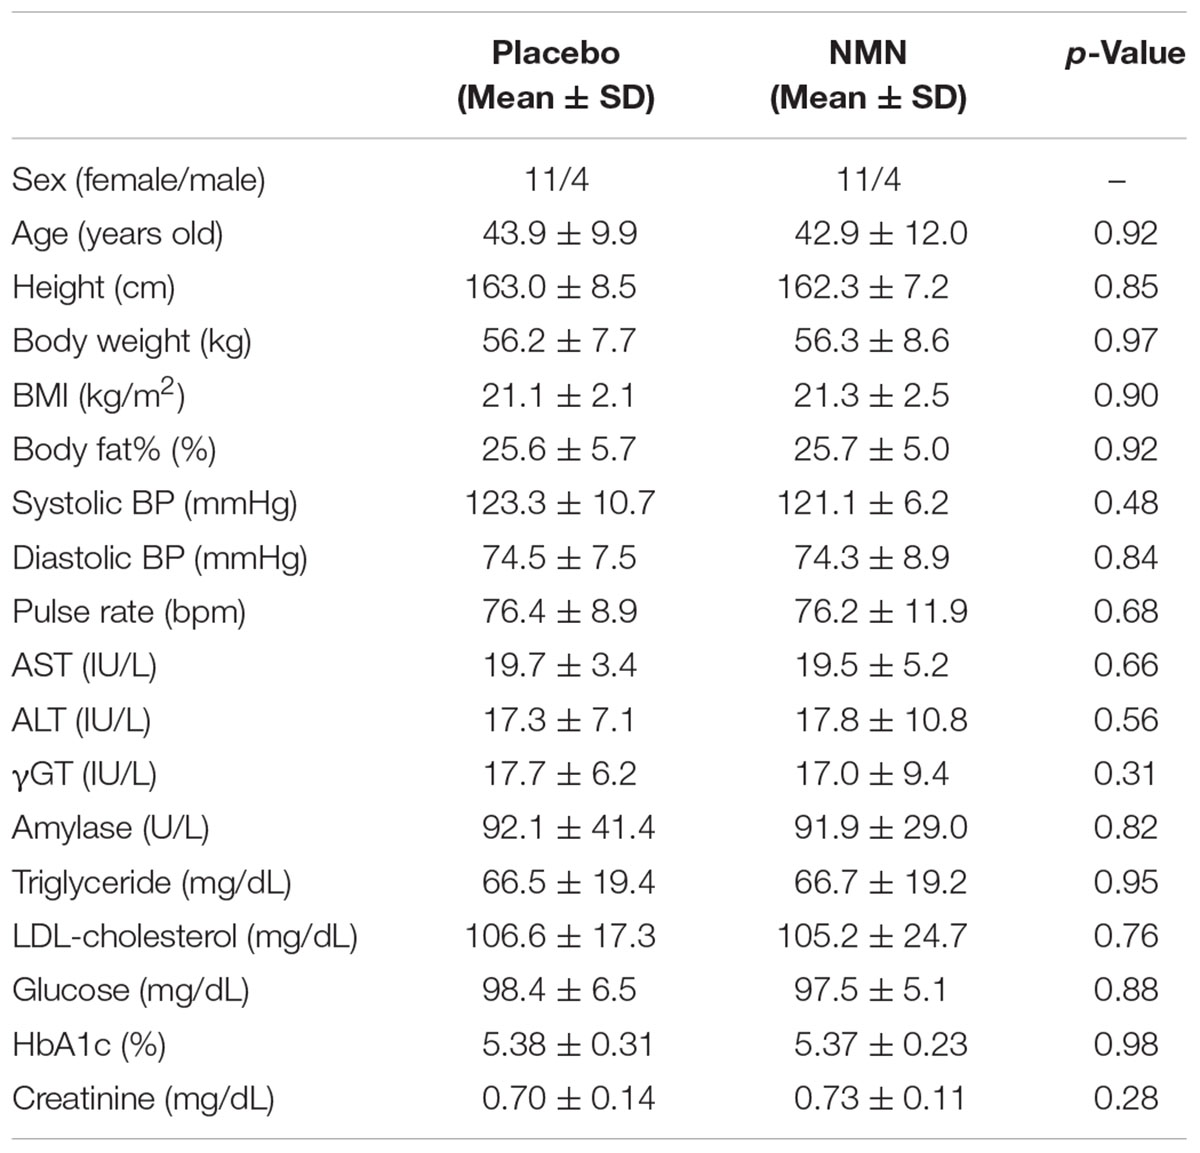 Frontiers Oral Administration of Nicotinamide Mononucleotide Is Safe and Efficiently Increases Blood Nicotinamide Adenine Dinucleotide Levels in Healthy Subjects photo image